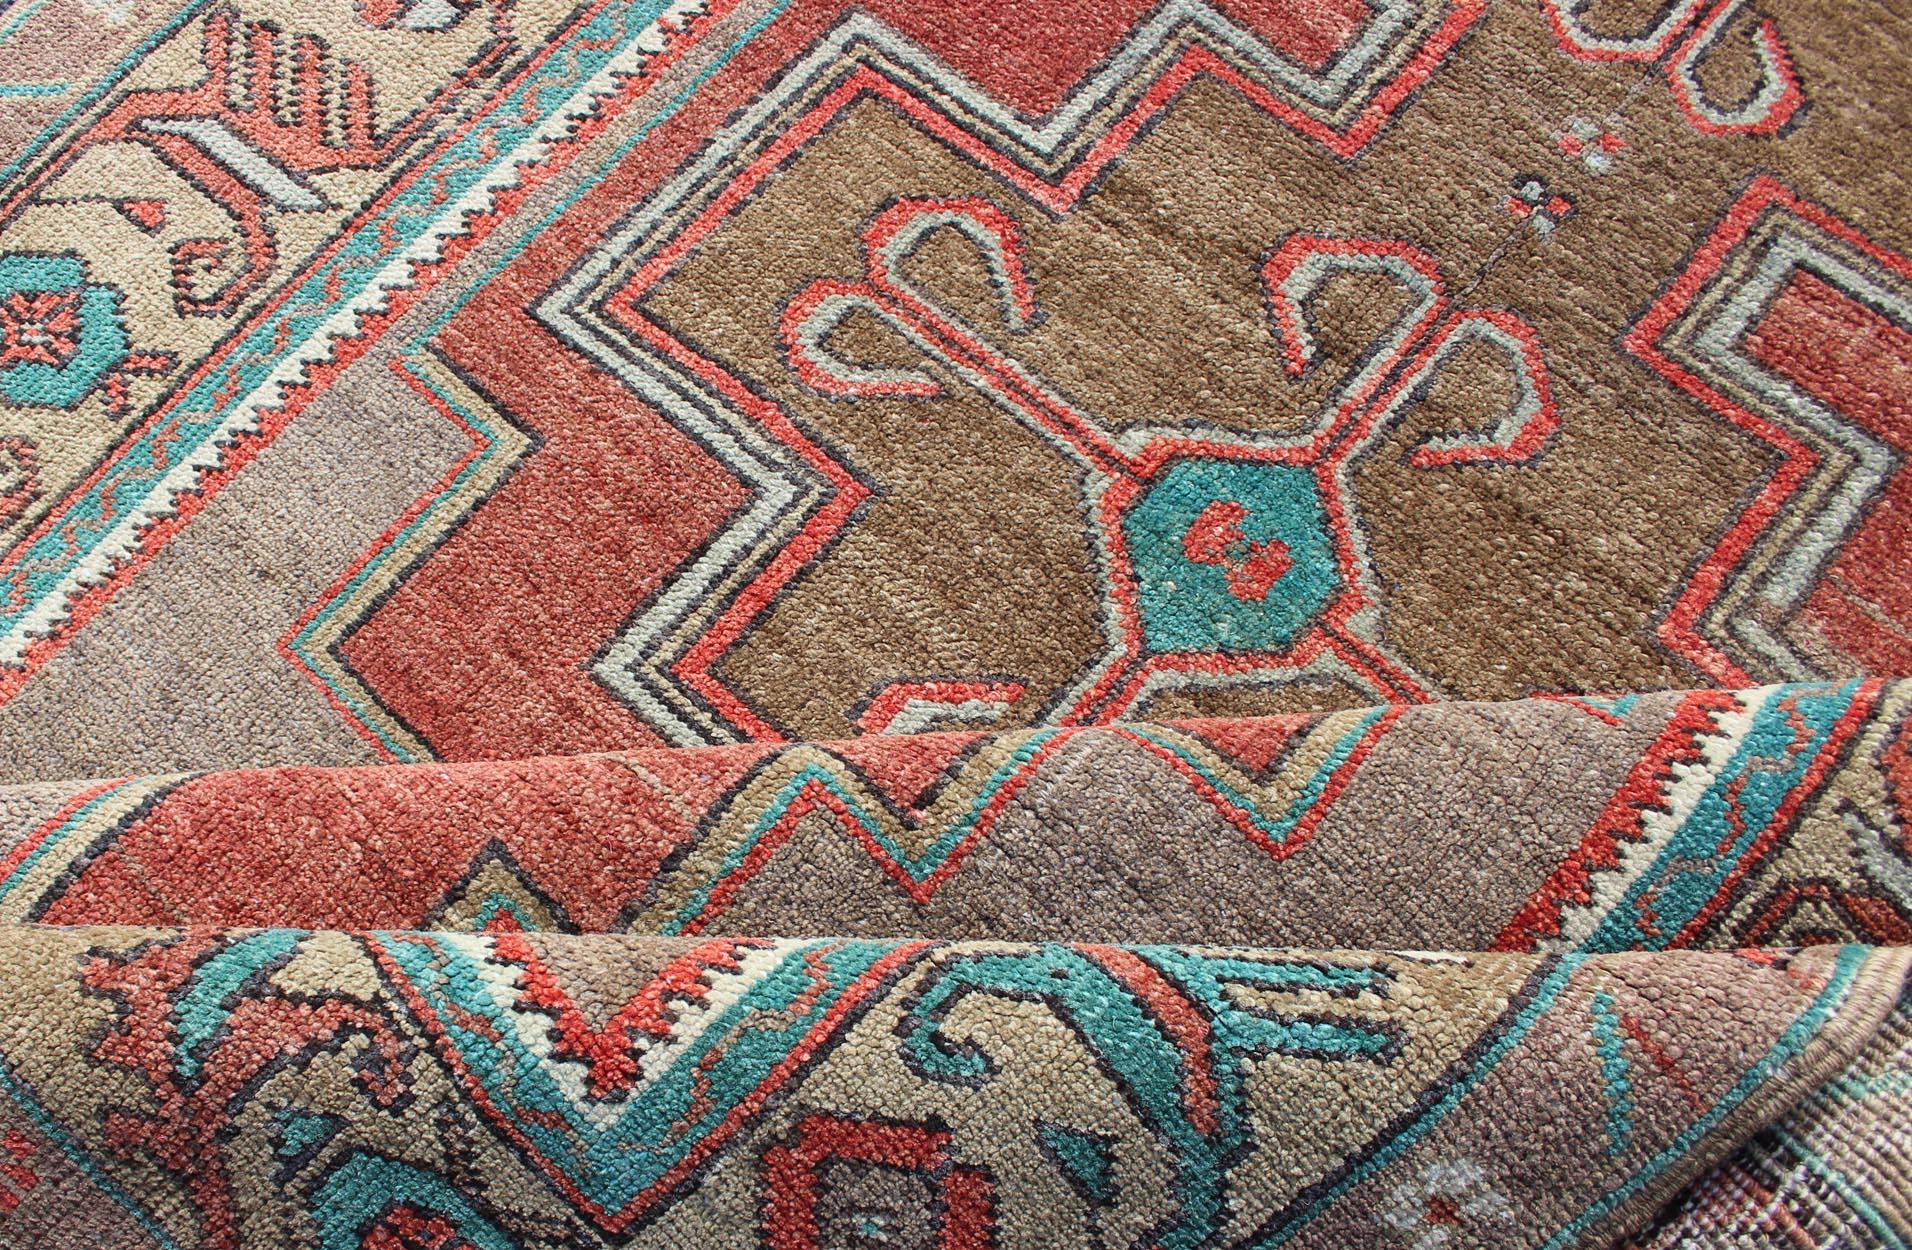 Double Medallion Vintage Turkish Oushak Rug in Rust Red and Turquoise In Good Condition For Sale In Atlanta, GA